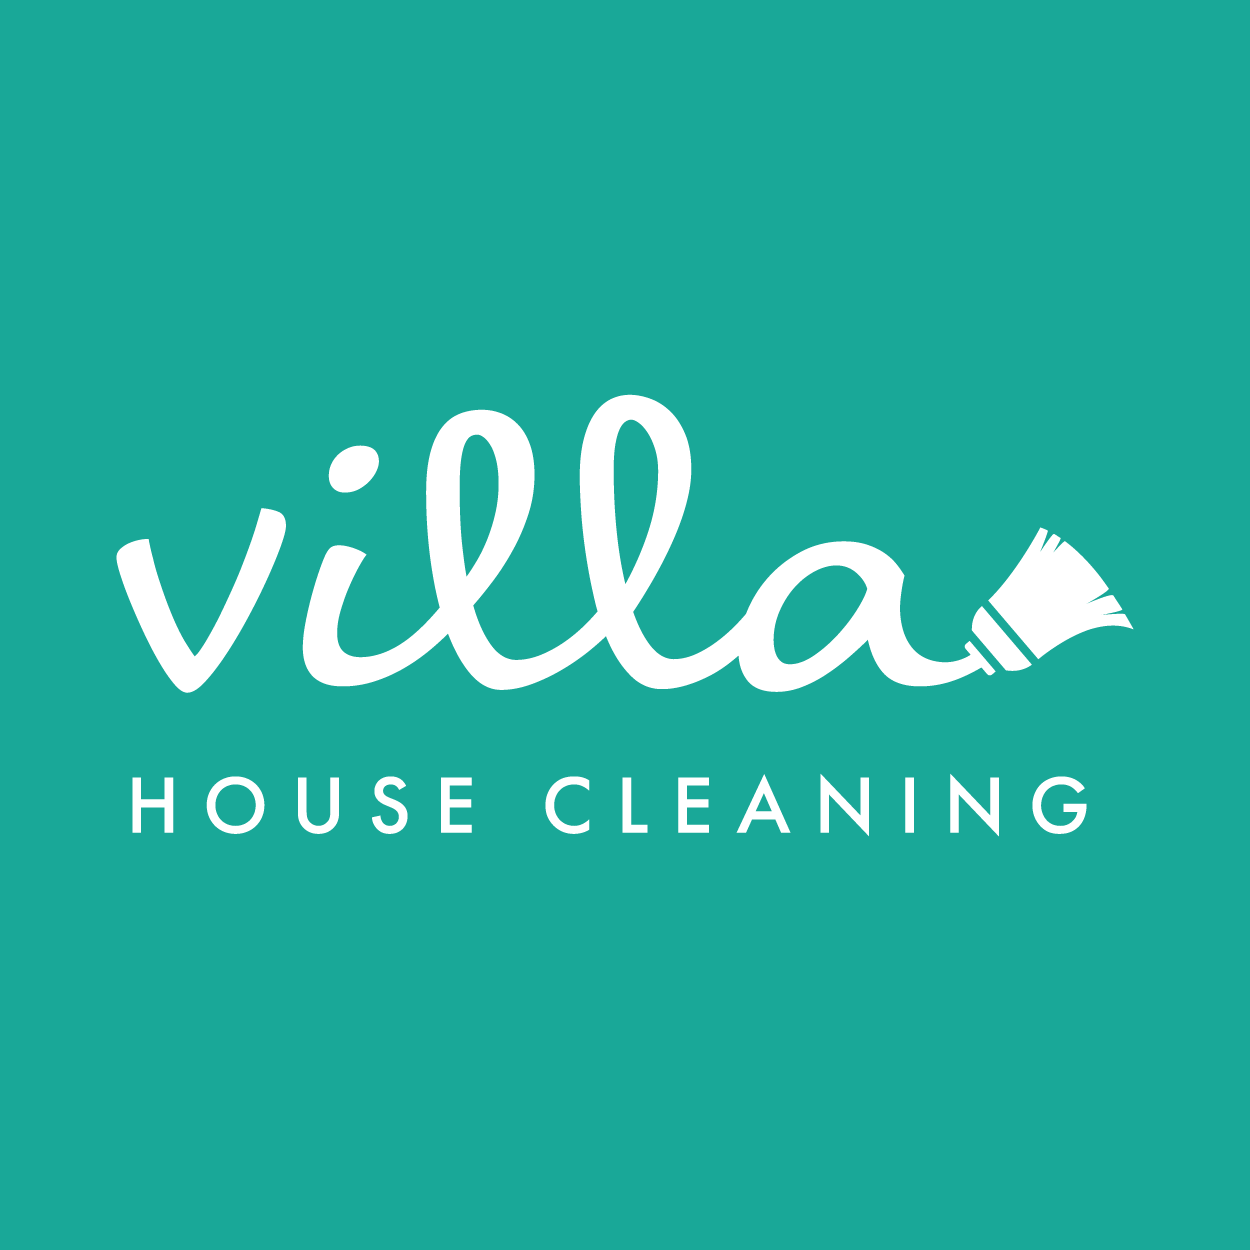 Villa House Cleaning Logo